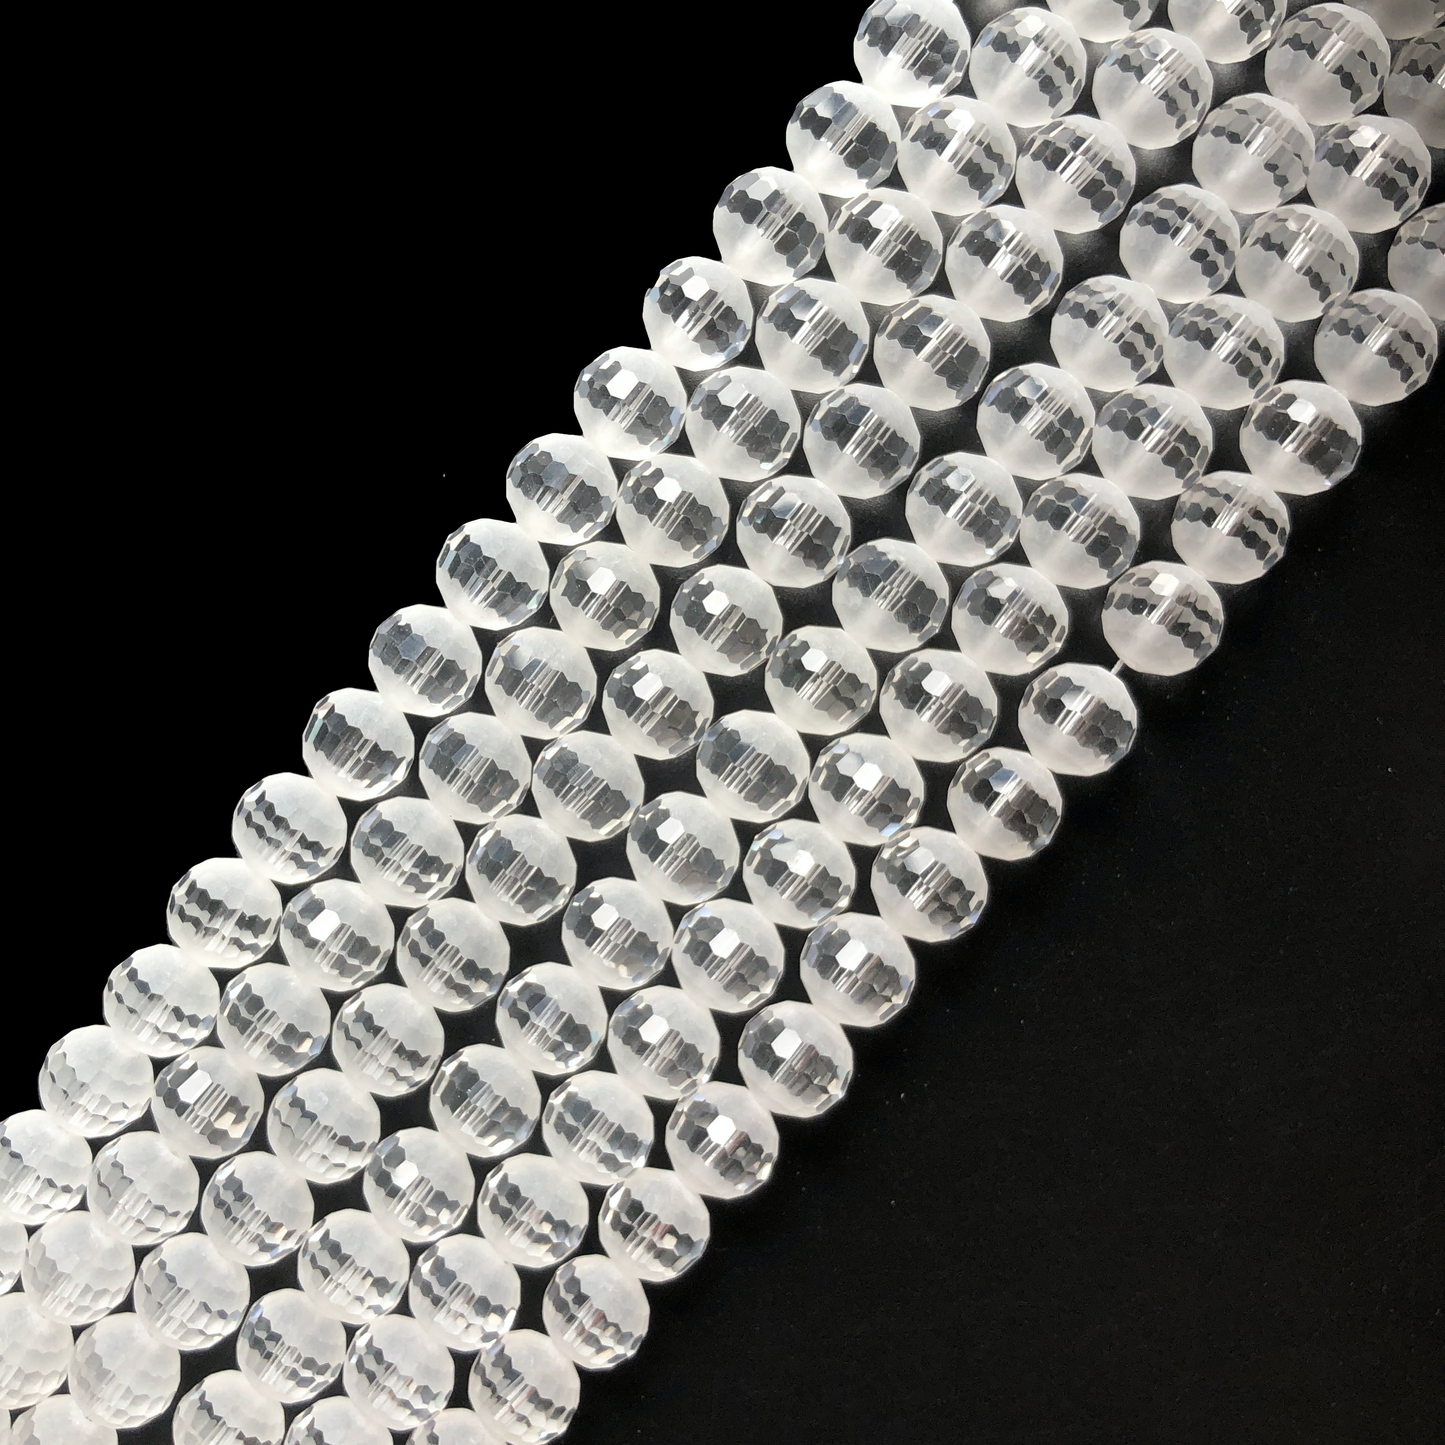 2 Strands/lot 10mm Half Matte Clear 96 Faceted Glass Beads Glass Beads Faceted Glass Beads Charms Beads Beyond